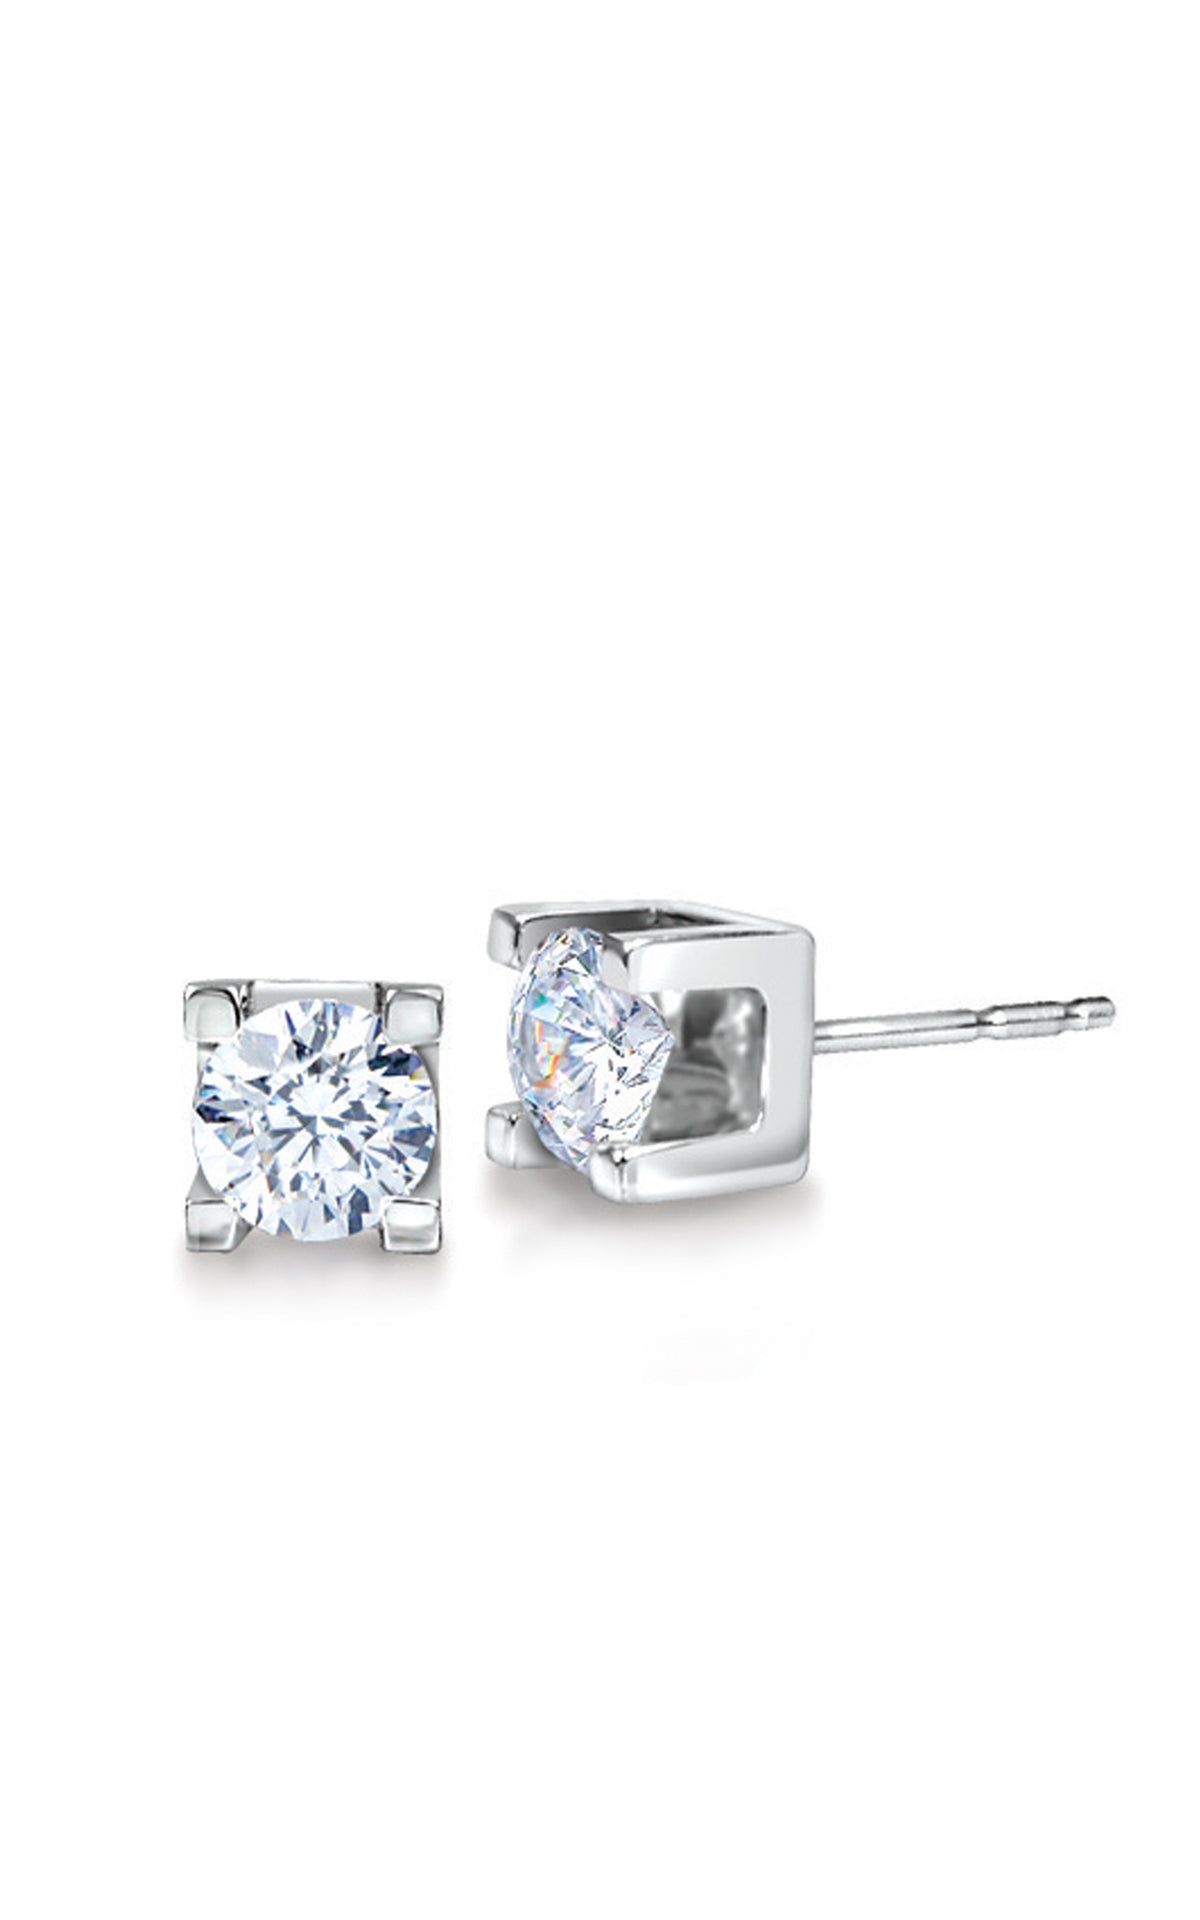 Canadian Diamond 0.15ct Solitaire Earrings in Four Claw Setting Set in 14K White Gold